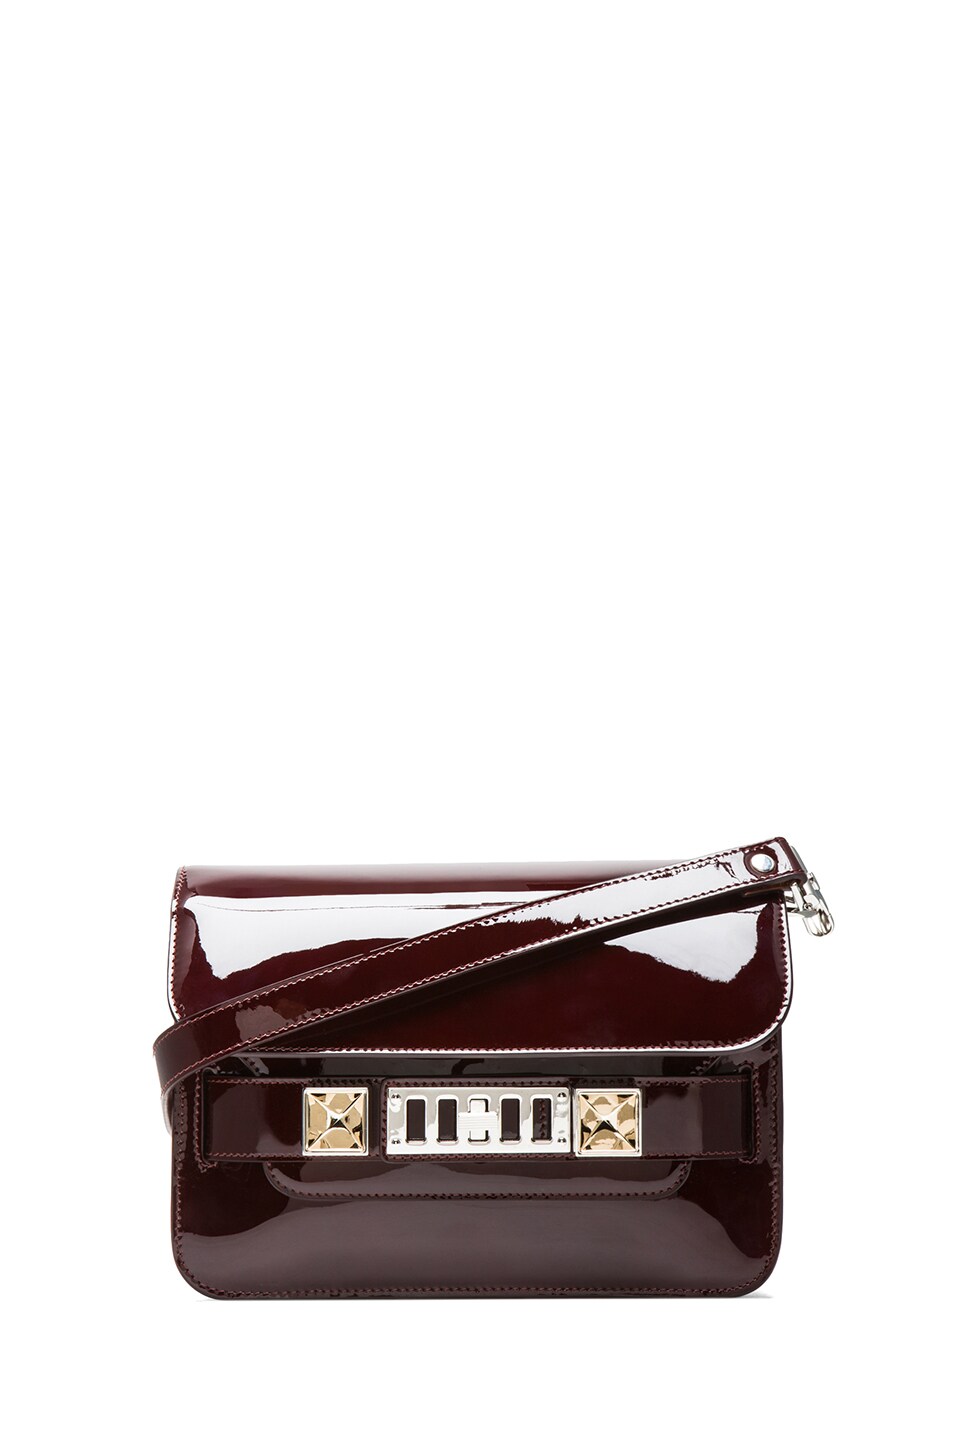 Image 1 of Proenza Schouler Mini PS11 Classic Patent Leather Bag in Pinot Noir